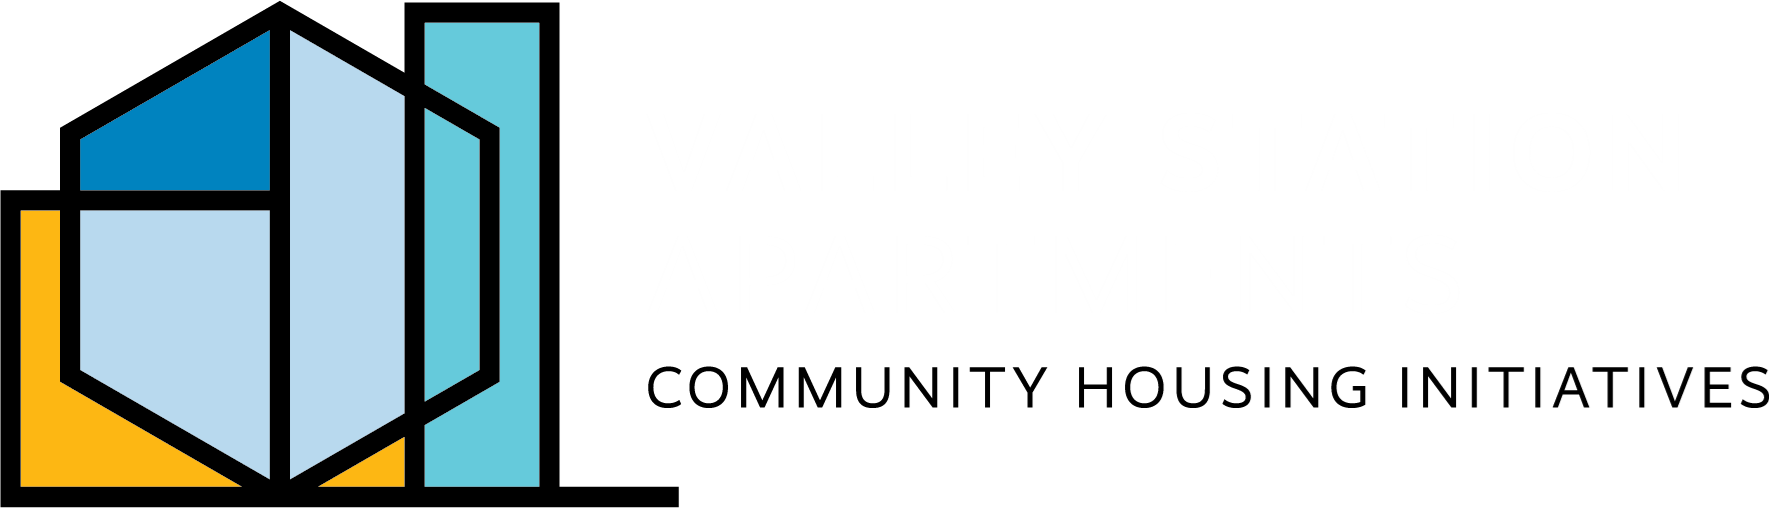 Valley Station Apartments In West Des Moines